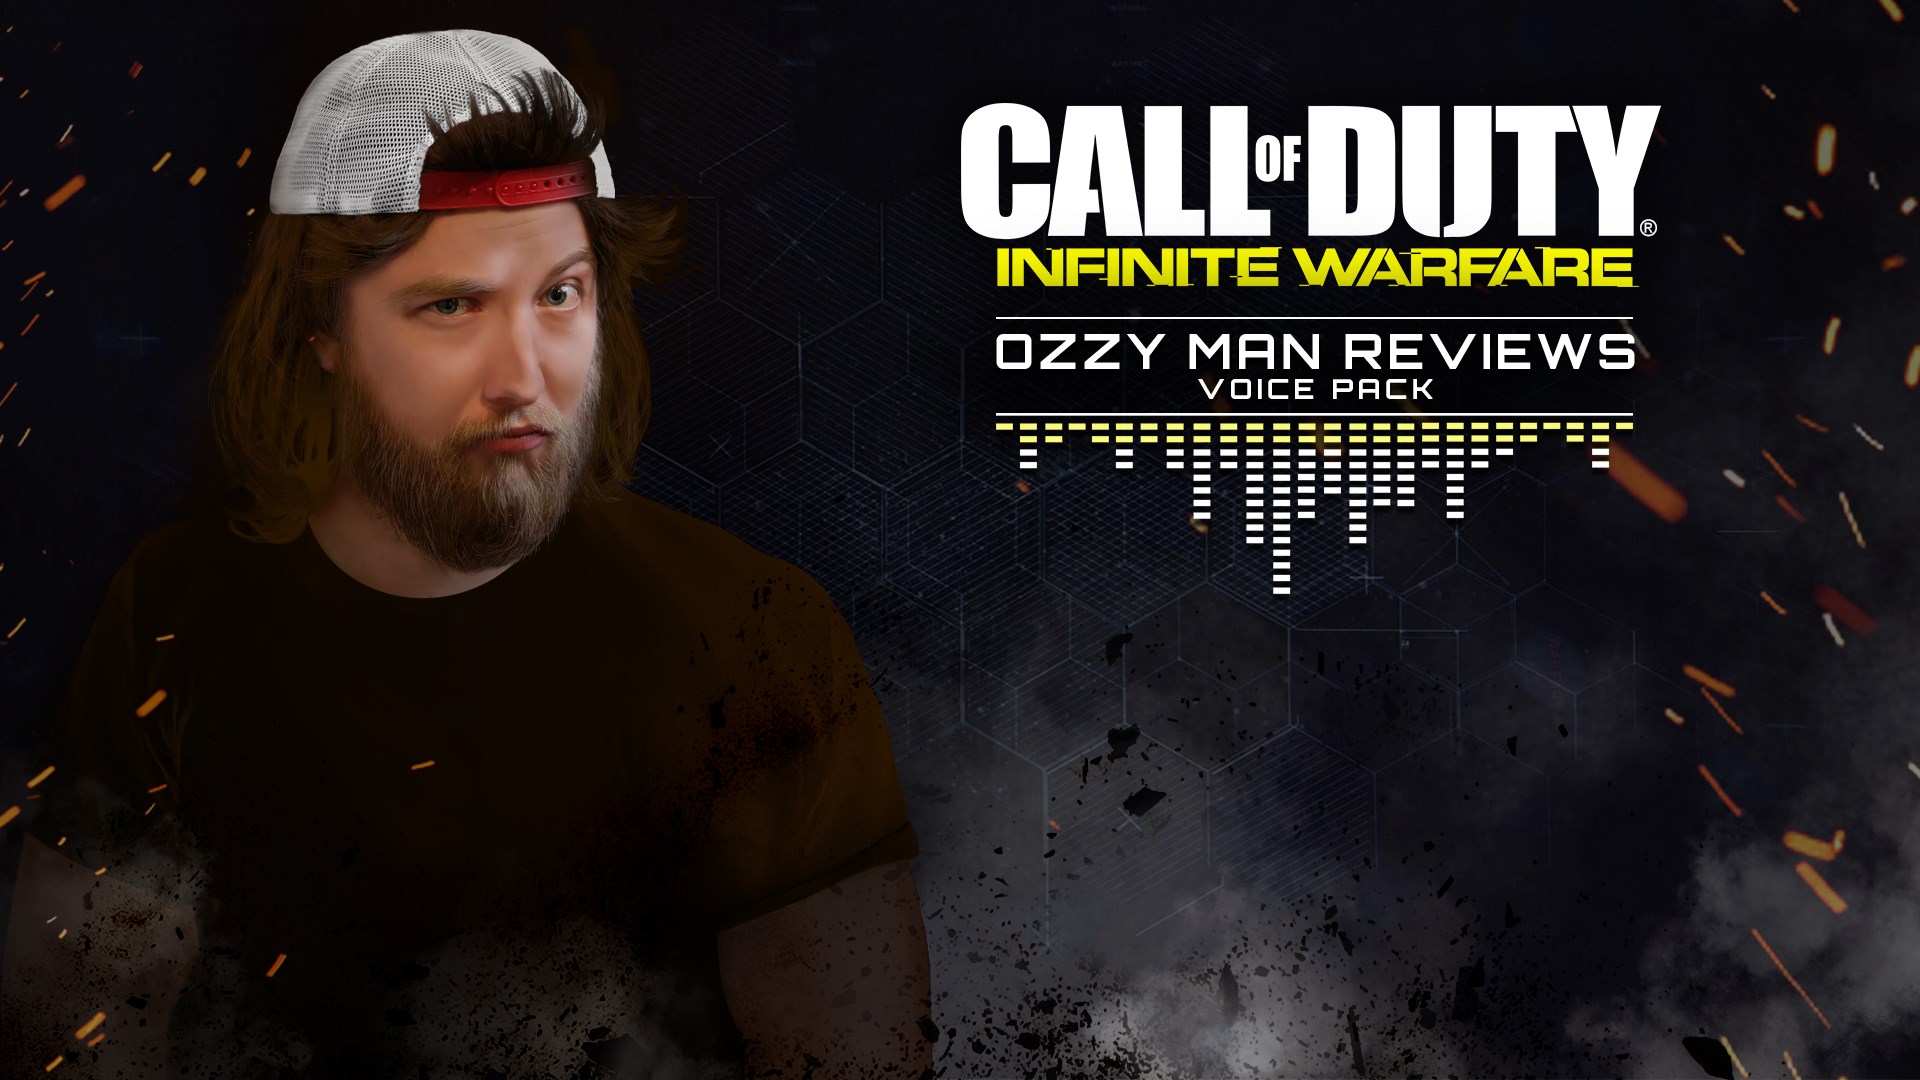 Call of Duty®: Infinite Warfare - Ozzy Man Reviews VO Pack